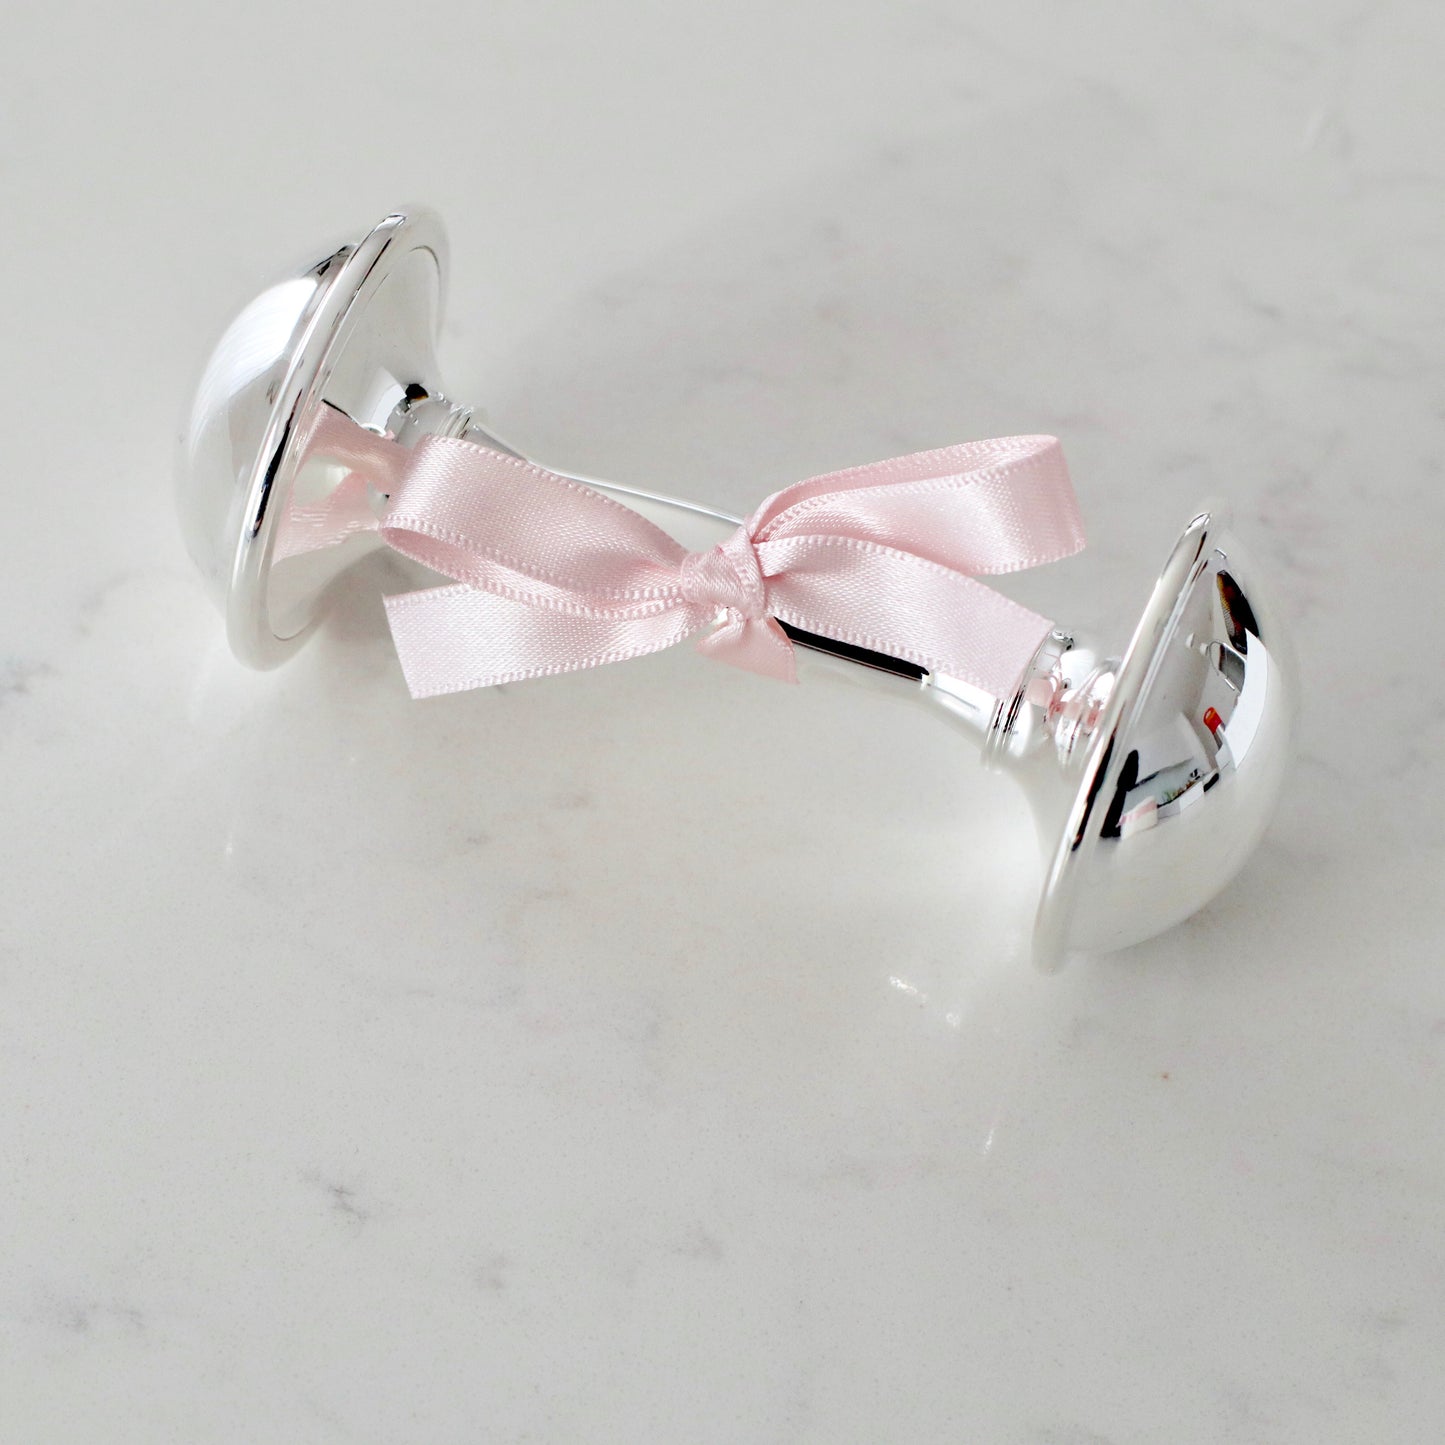 Silver Plated Rattle - Silver or Gold plated keepsake rattle 